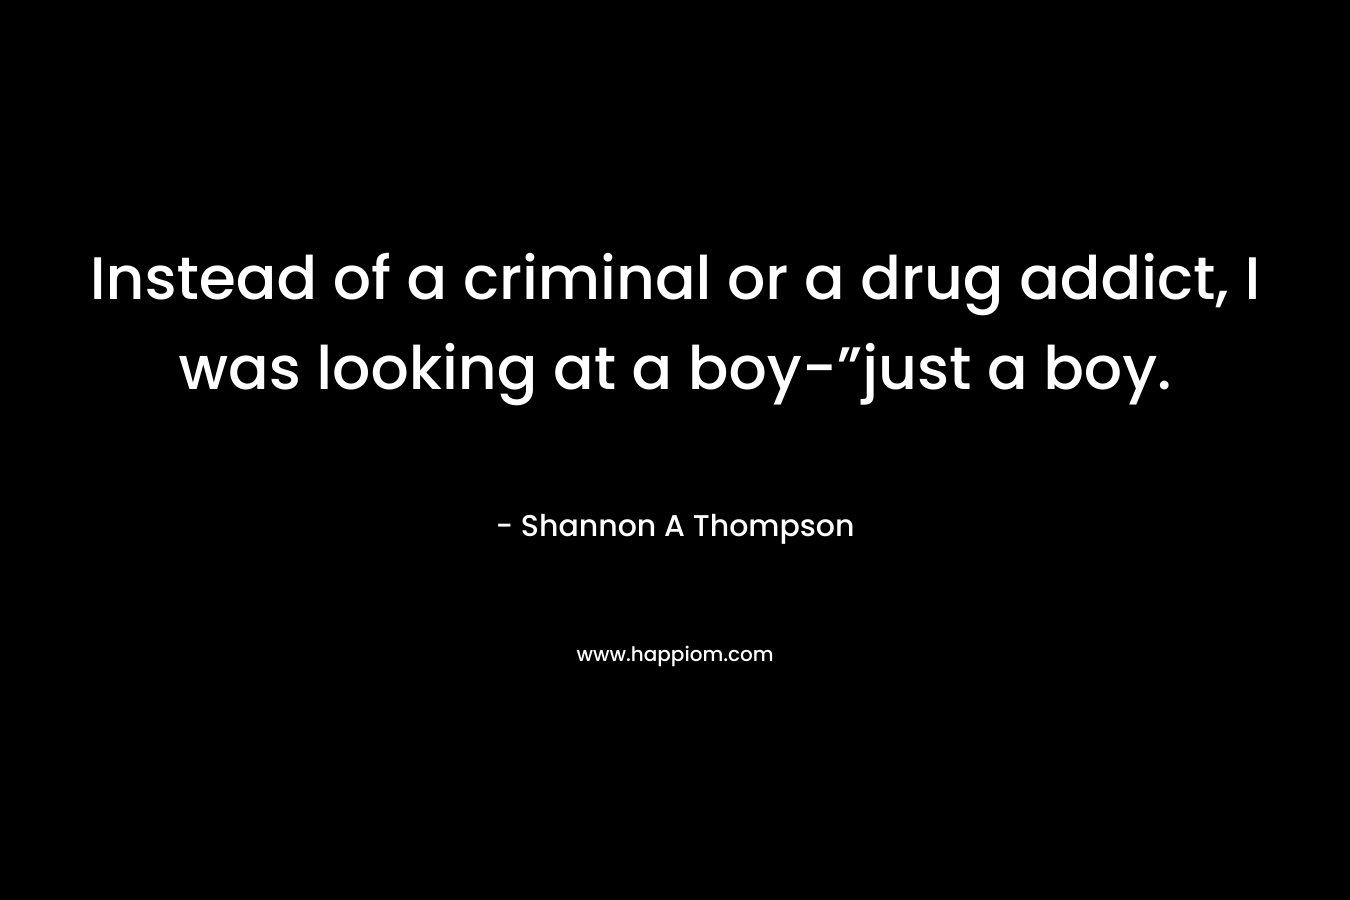 Instead of a criminal or a drug addict, I was looking at a boy-”just a boy.